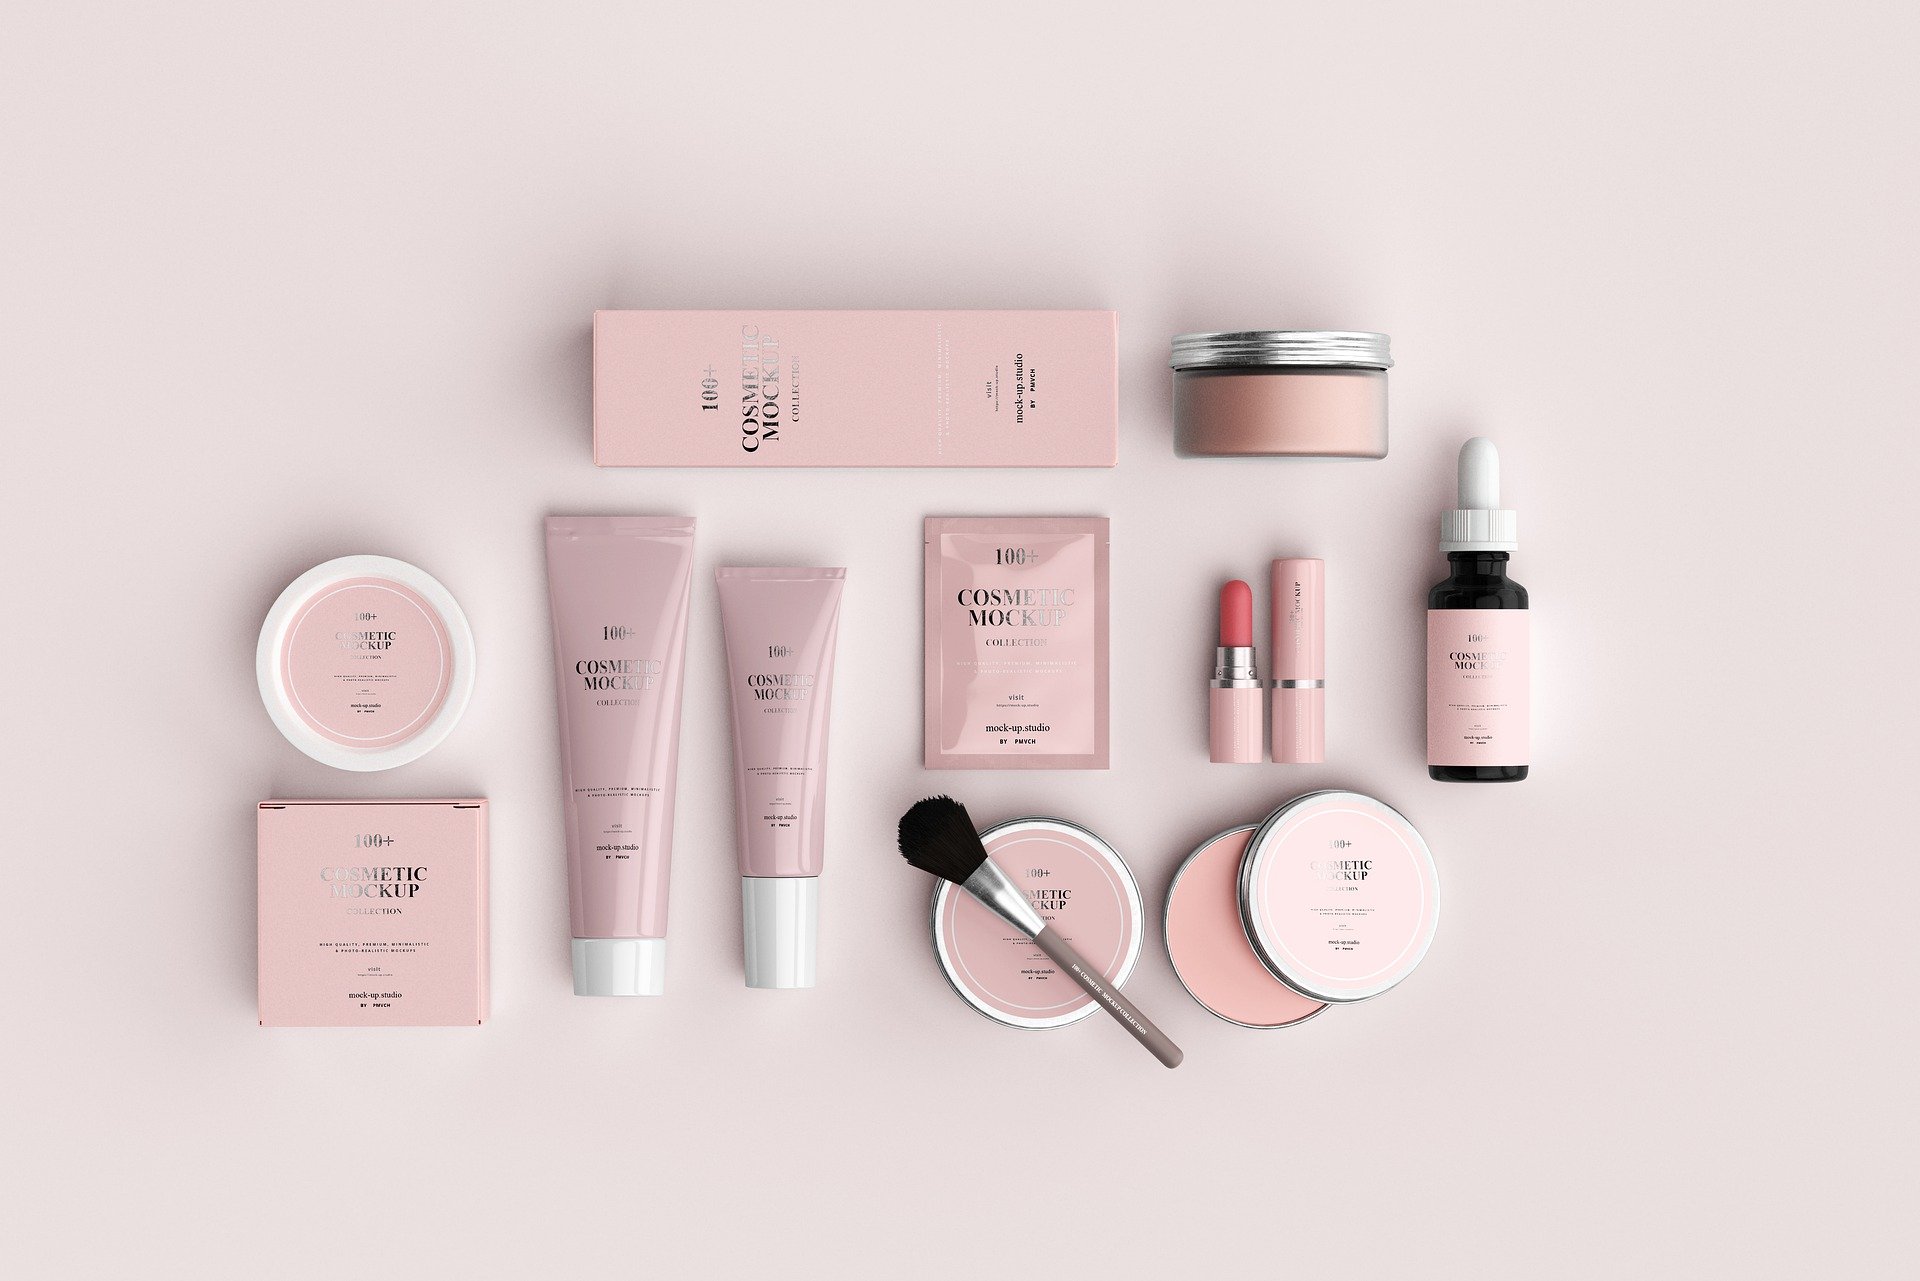 5 tips for cosmetic packaging design that sells